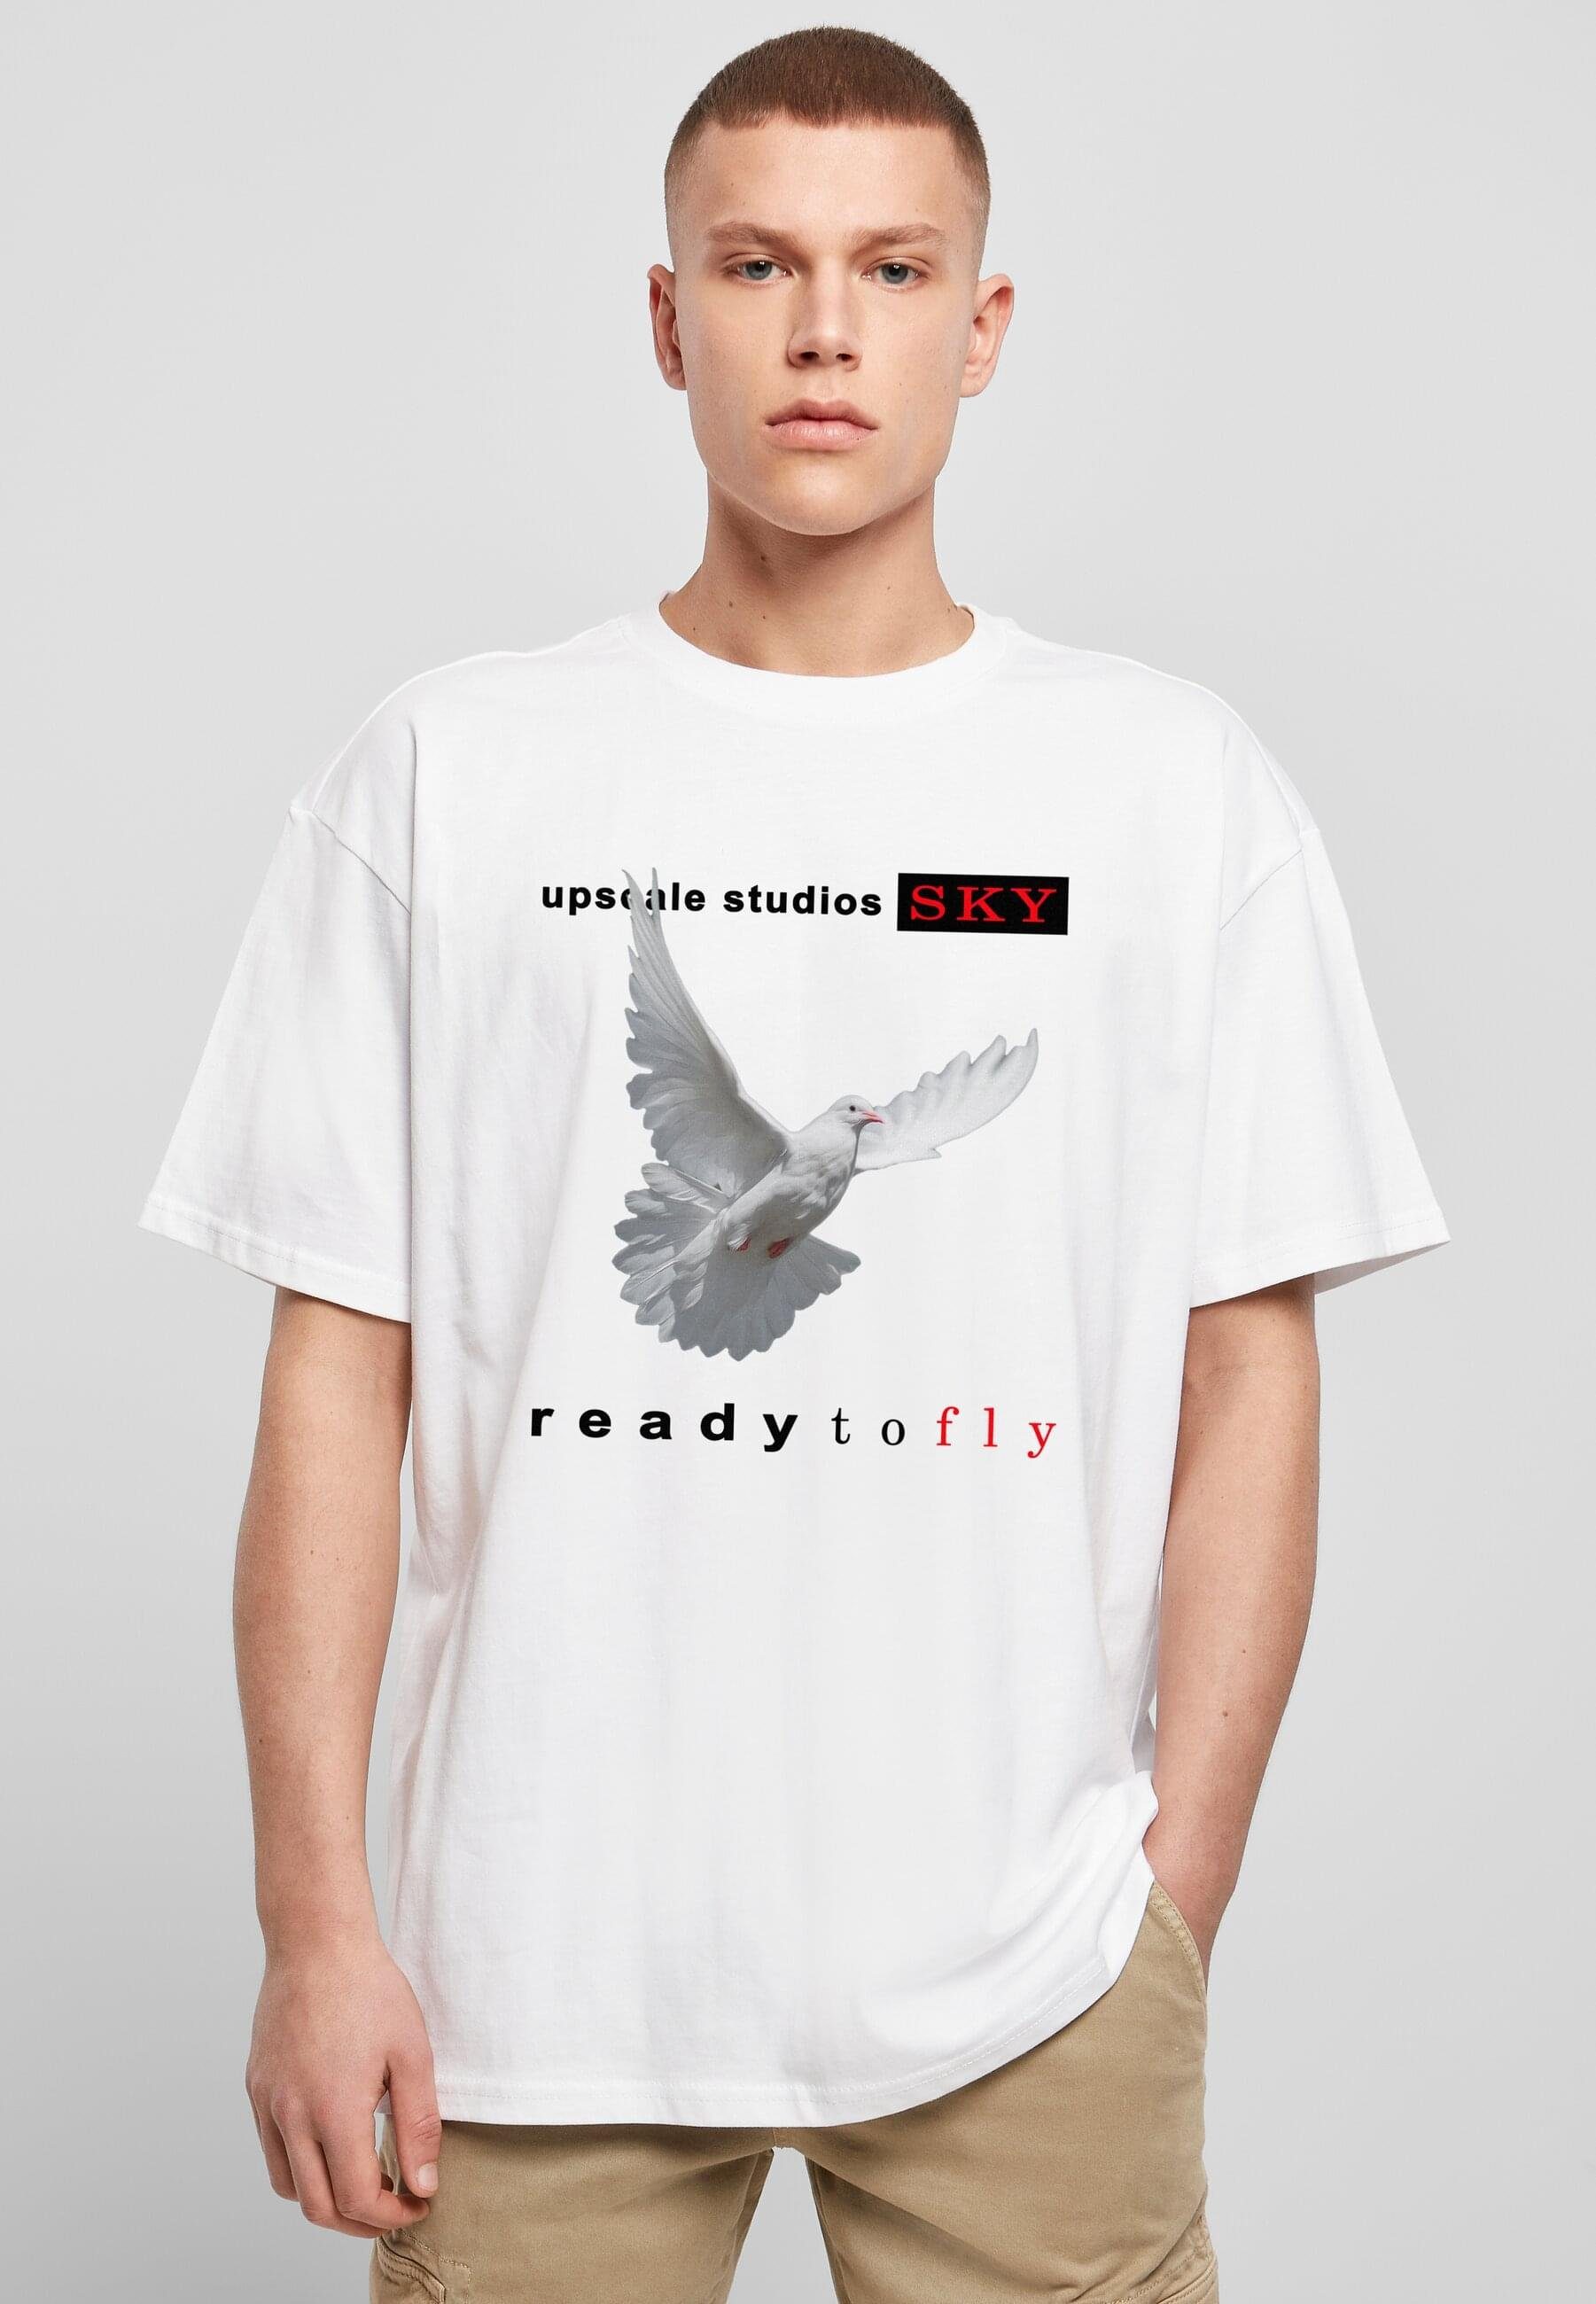 T-Shirt white Oversize fly Tee by (1-tlg) to Mister Tee Ready Unisex Upscale